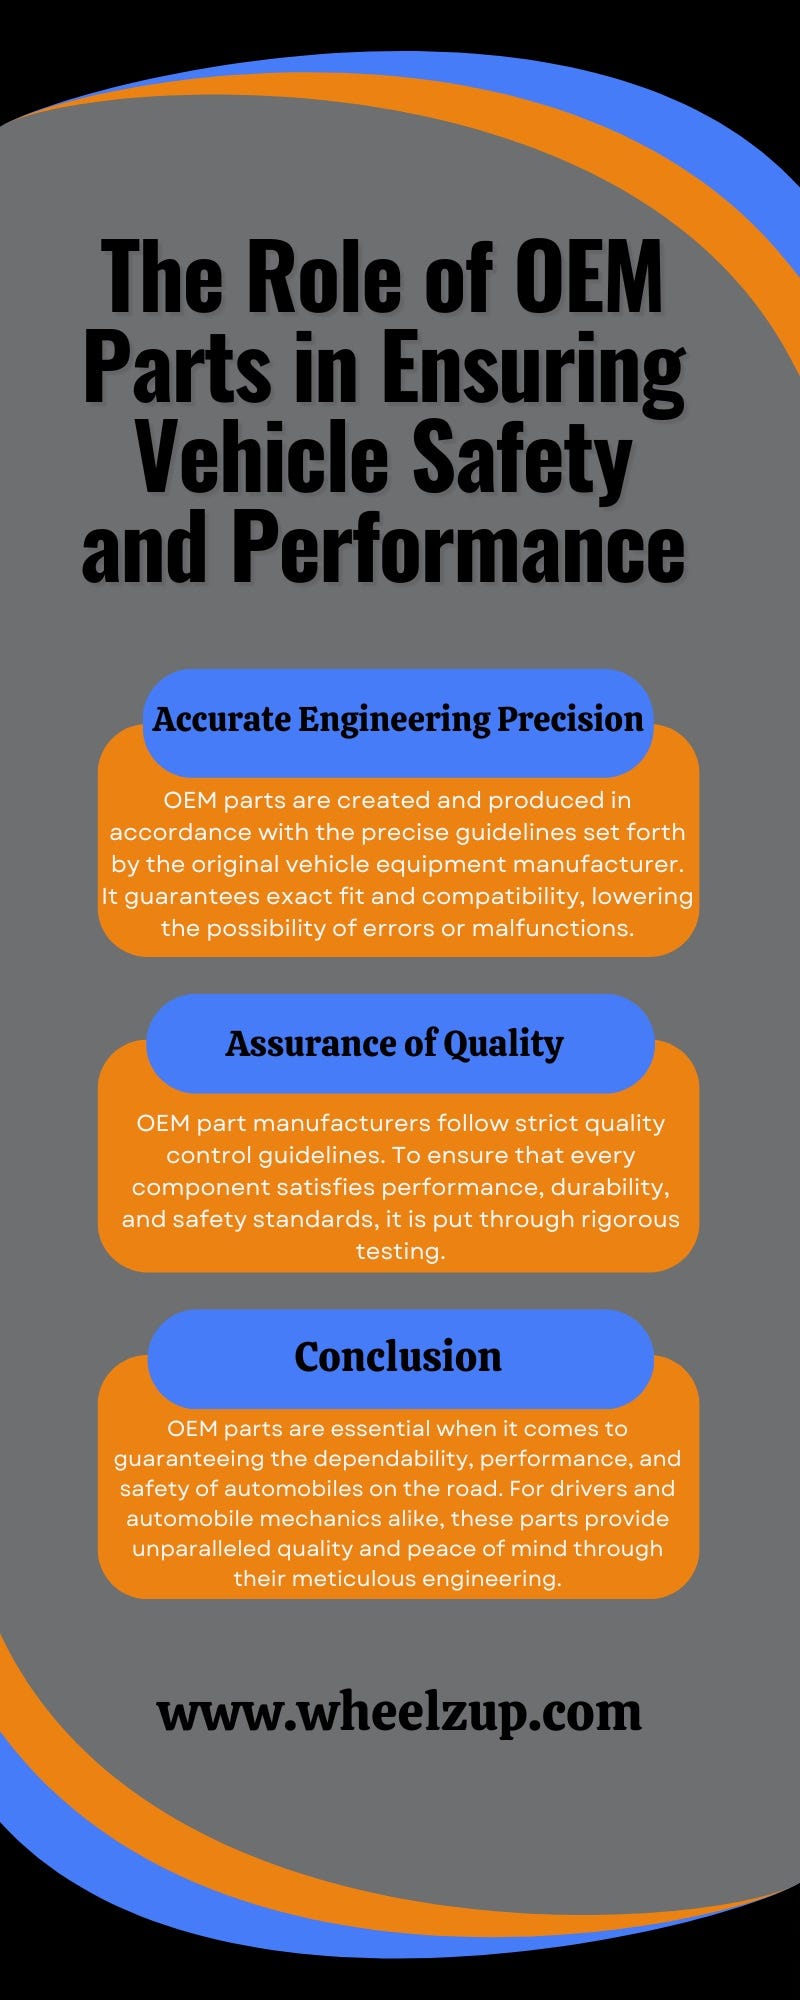 The Role of OEM Parts in Ensuring Vehicle Safety and Performance - Wheel Up, LLC - Medium